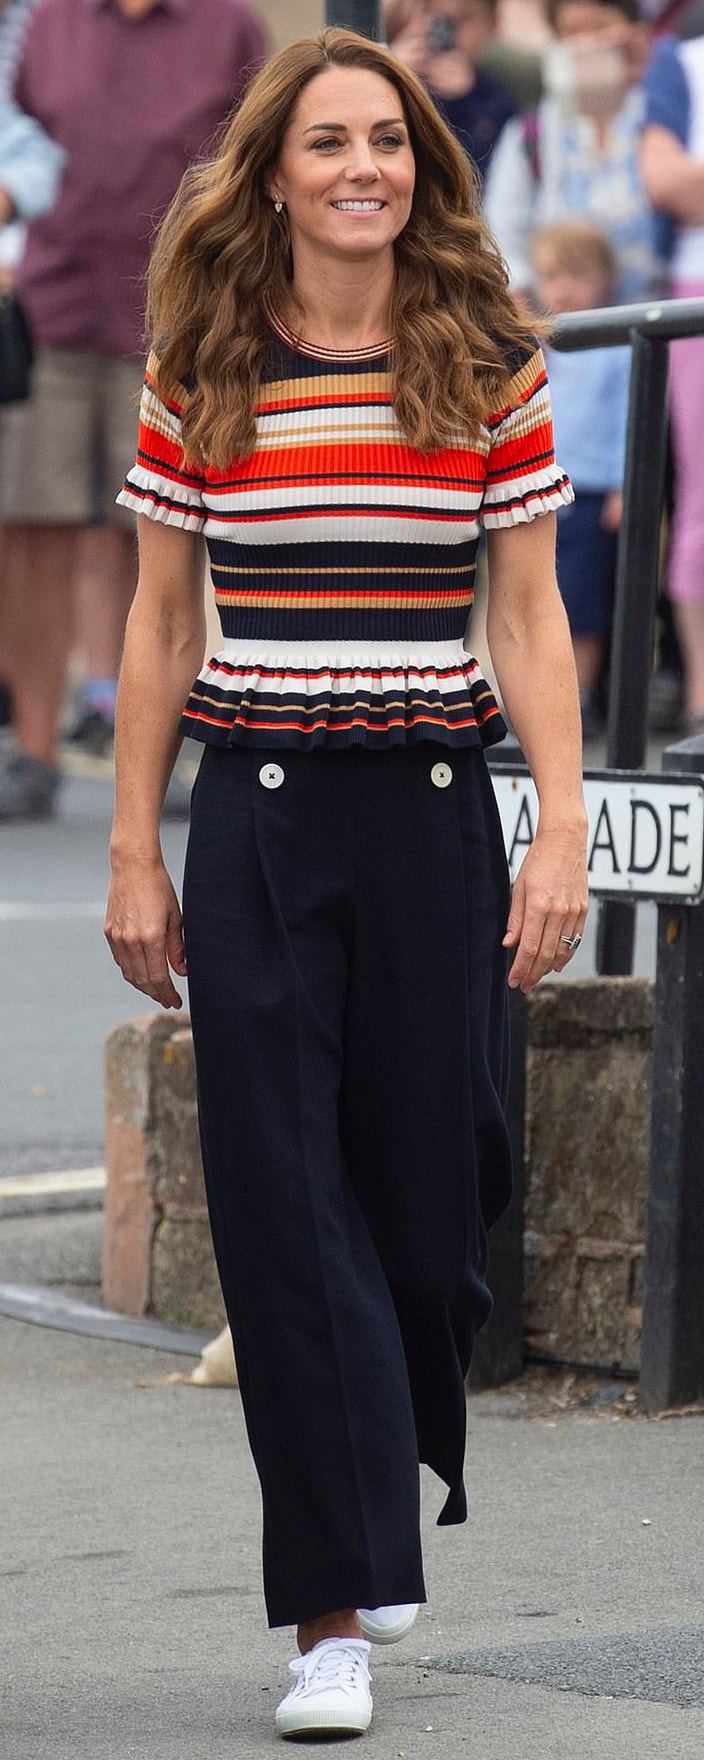 Sandro Striped Frilled Knit Top as seen on Kate Middleton, The Duchess of Cambridge.